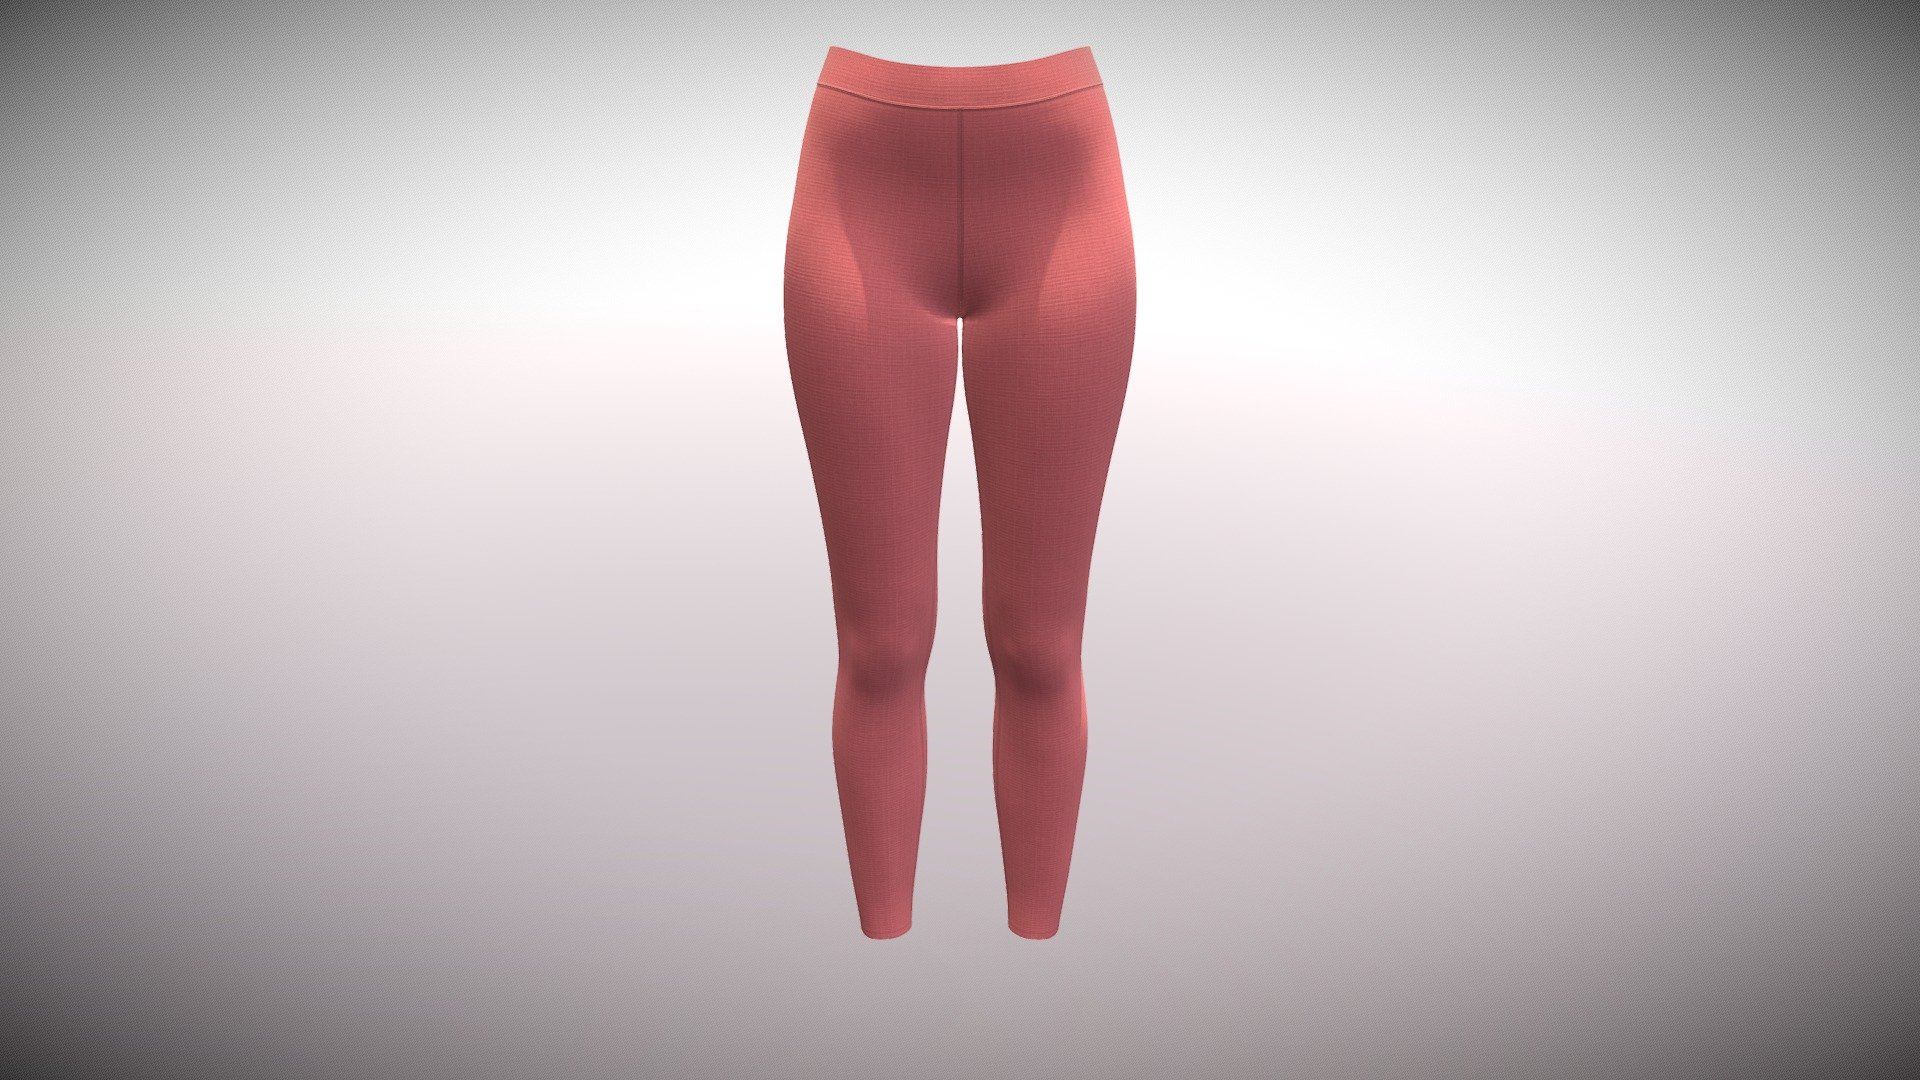 Cloth Title = Women's Contour Ultra High Rise Ankle Leggings 

SKU = DG100041 

Category = Women 

Product Type = Leggings 

Cloth Length = Long 

Body Fit = Skinny Fit 

Occasion = Activewear  

Waist Rise = High Rise 


Our Services:

3D Apparel Design

OBJ,FBX,GLTF Making with High/Low Poly

Fabric Digitalization

Mockup making

3D Teck Pack

Pattern Making

2D Illustration

Cloth Animation Spin Video


Contact us:- 

Email: info@digitalfashionwear.com 

Website: https://digitalfashionwear.com 

WhatsApp No: +8801759350445 


We designed all the types of cloth specially focused on product visualization, e-commerce, fitting, and production. 

We will design: 

T-shirts 

Polo shirts 

Hoodies 

Sweatshirt 

Jackets 

Shirts 

TankTops 

Trousers 

Bras 

Underwear 

Blazer 

Aprons 

Leggings 

and All Fashion items. 





Our goal is to make sure what we provide you, meets your demand 3d model